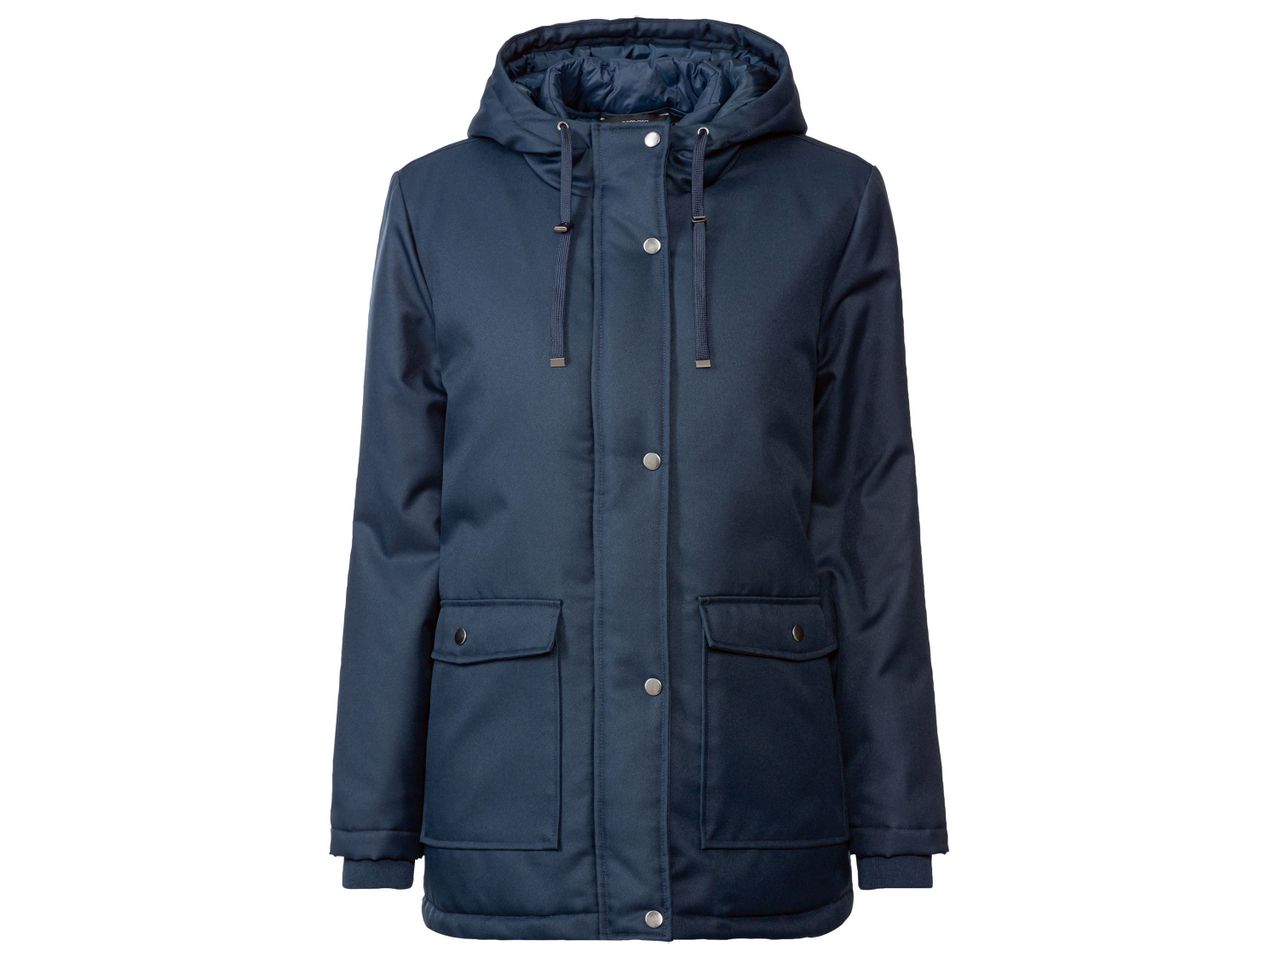 Go to full screen view: Ladies’ Parka with Inner Vest - Image 1